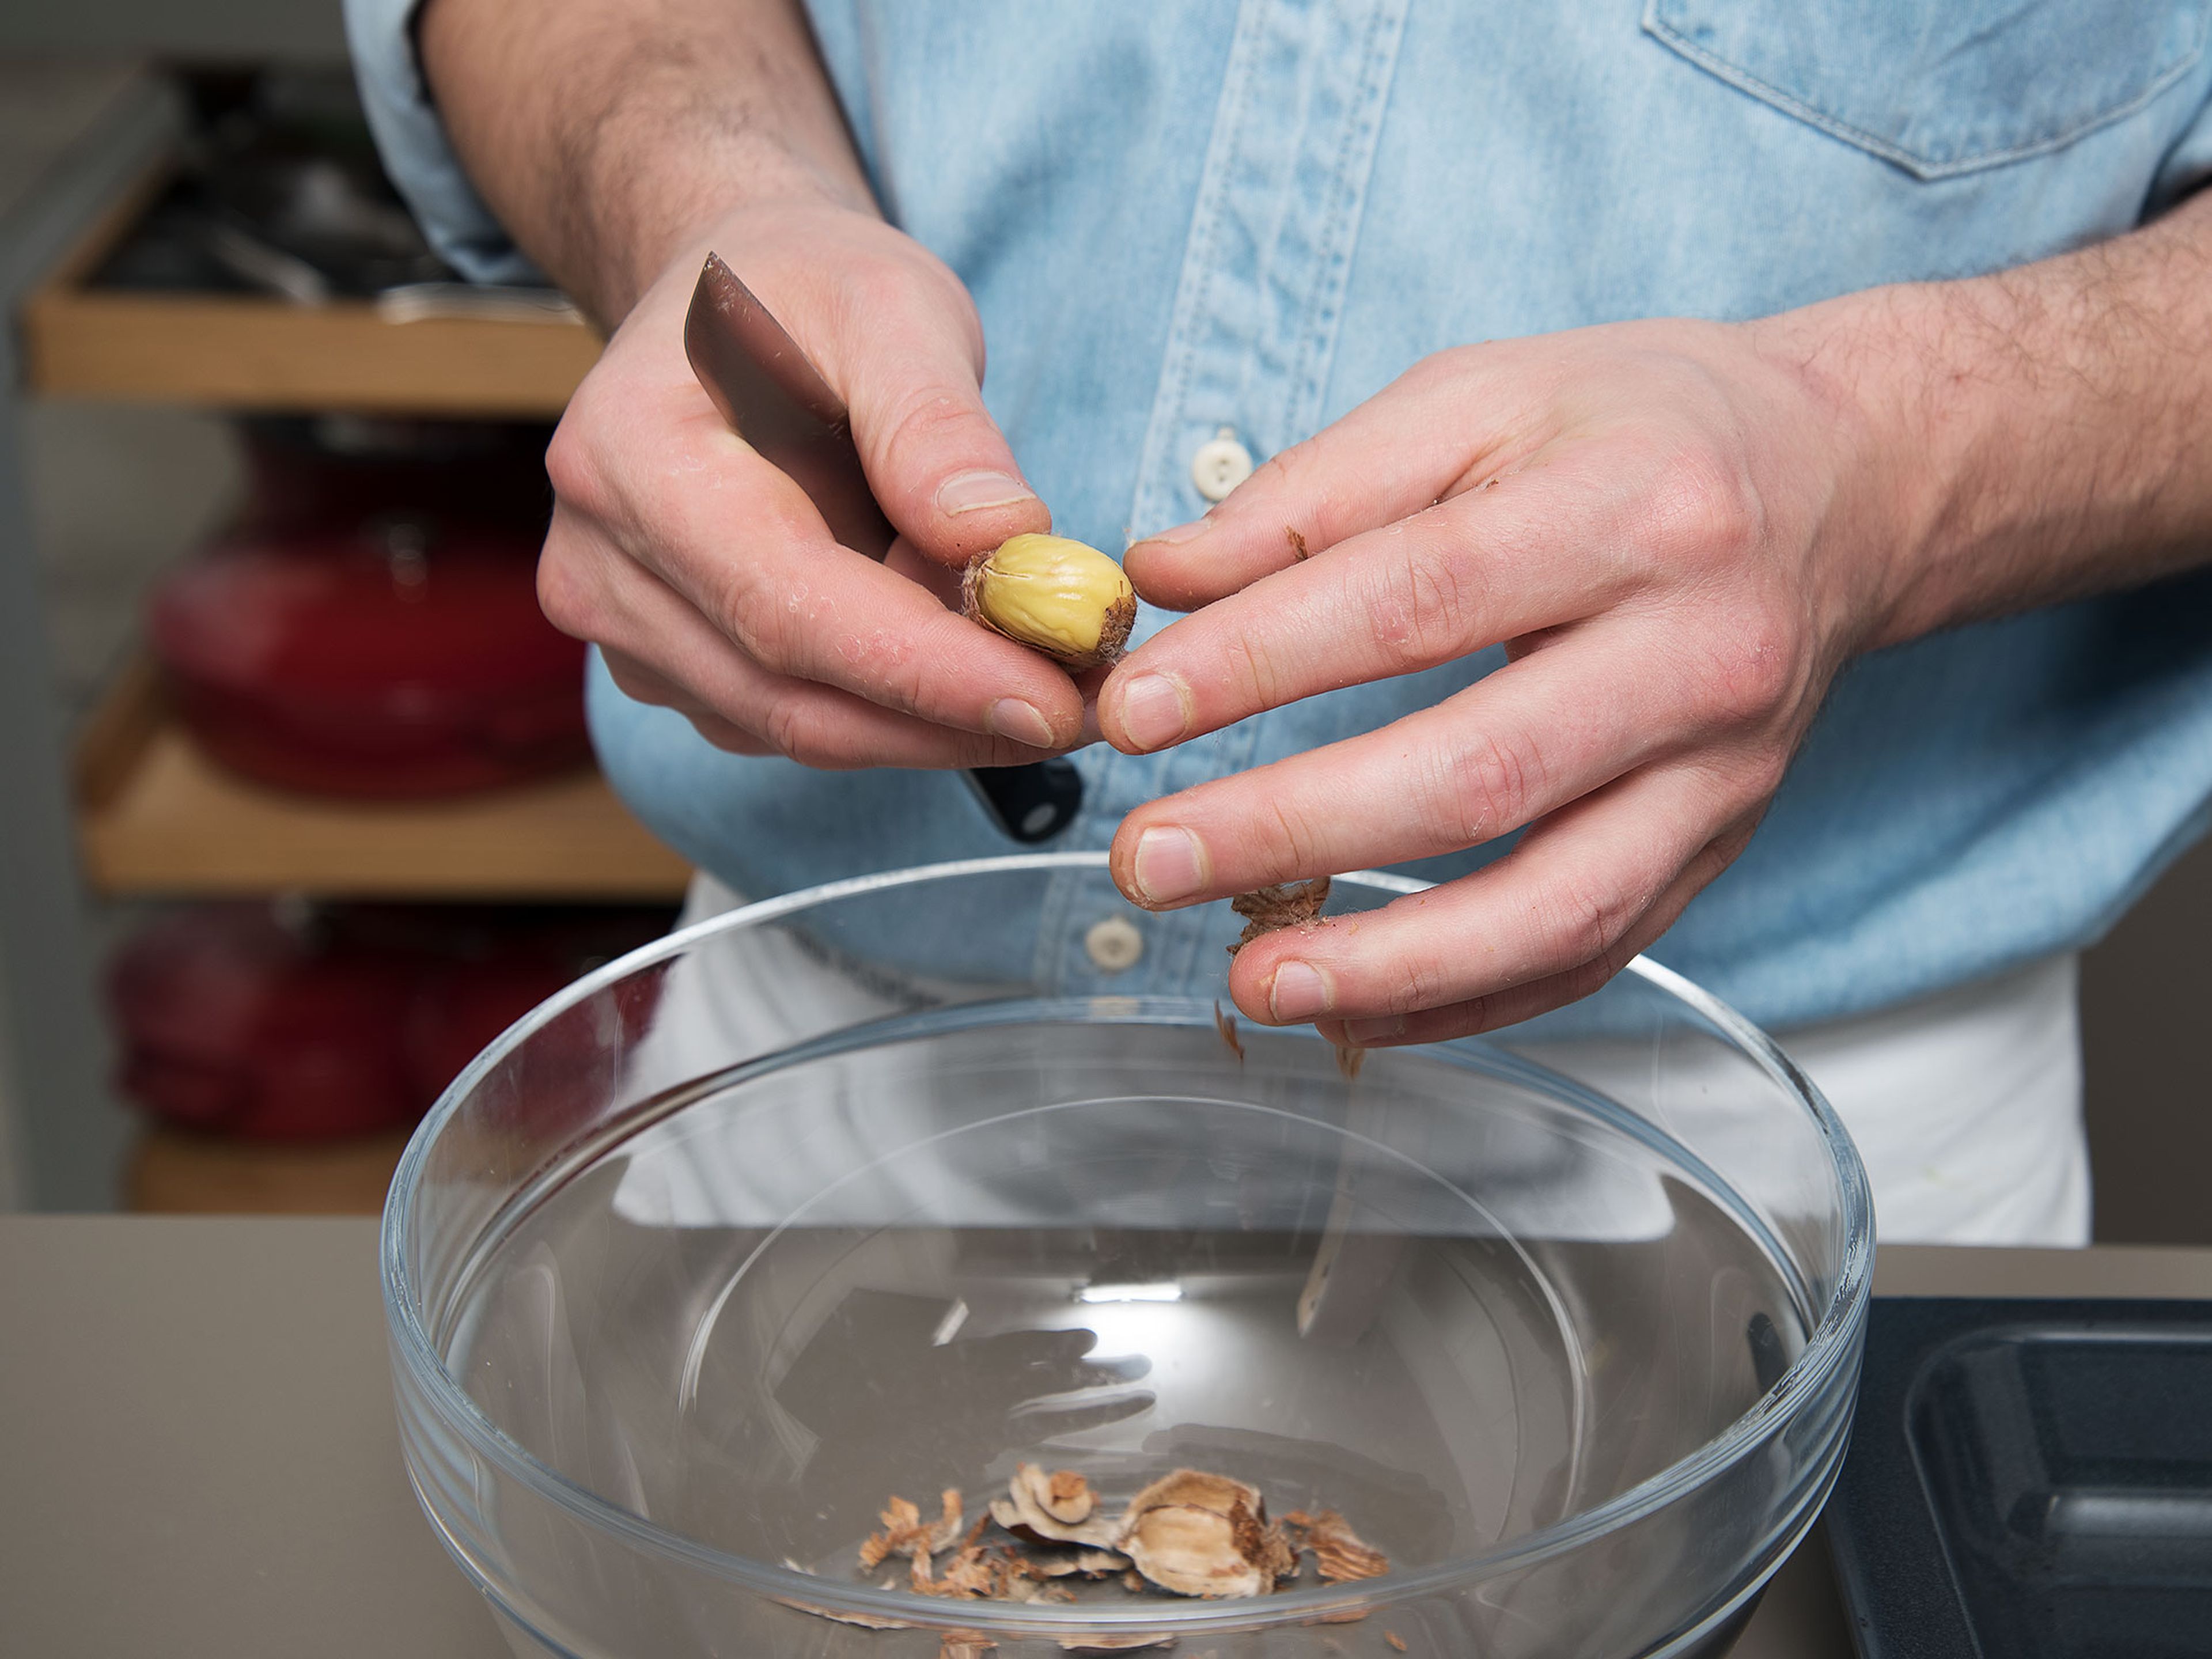 Remove chestnuts from oven and leave to cool for approx. 5 min., then remove from shell with a knife.